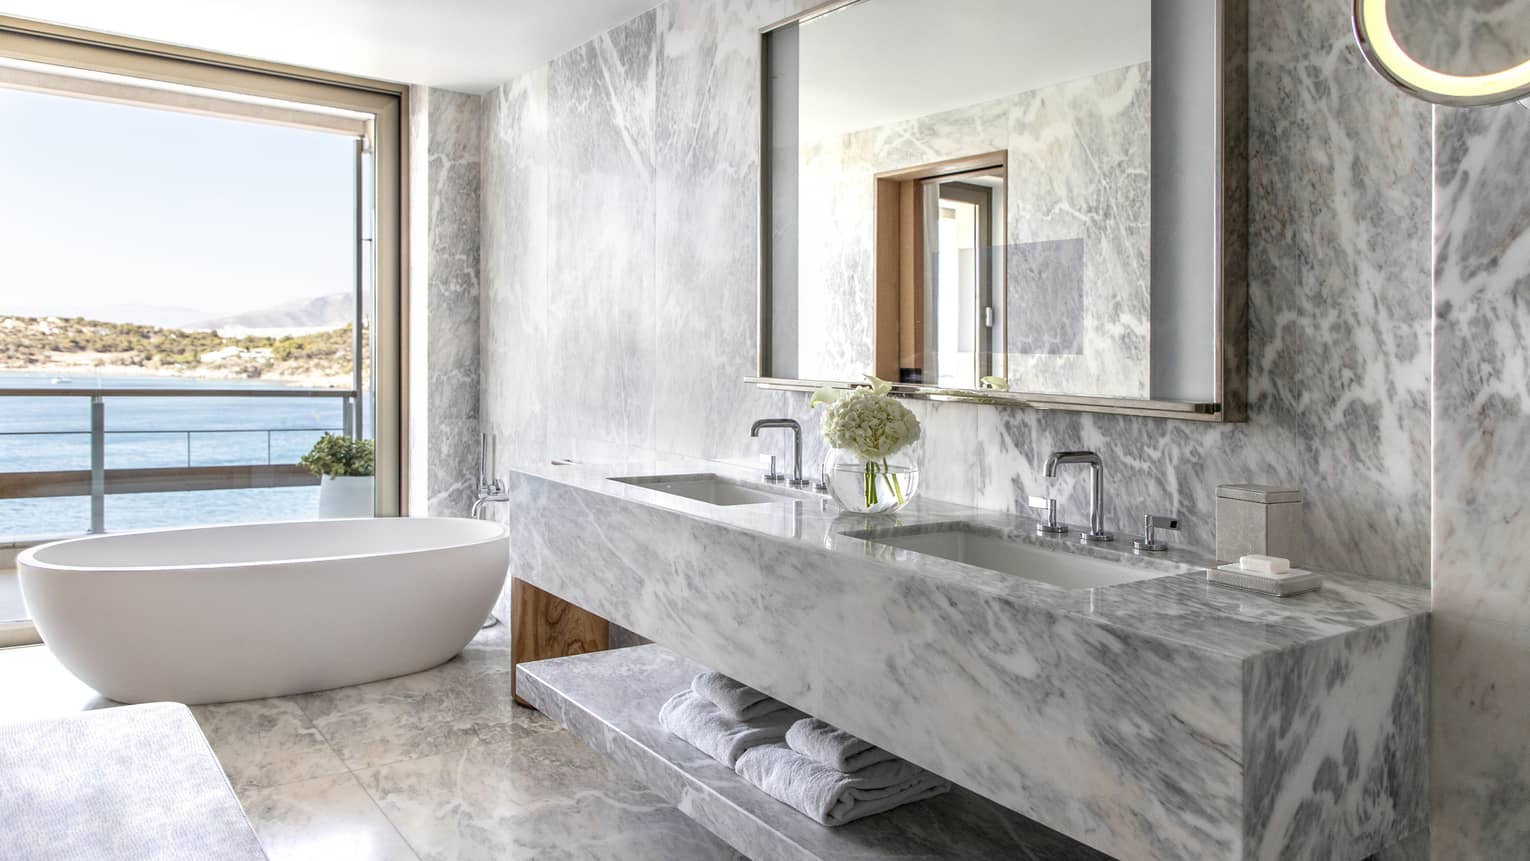 Bathroom with marble wall, vanity and floors, tub, open wall to the sea